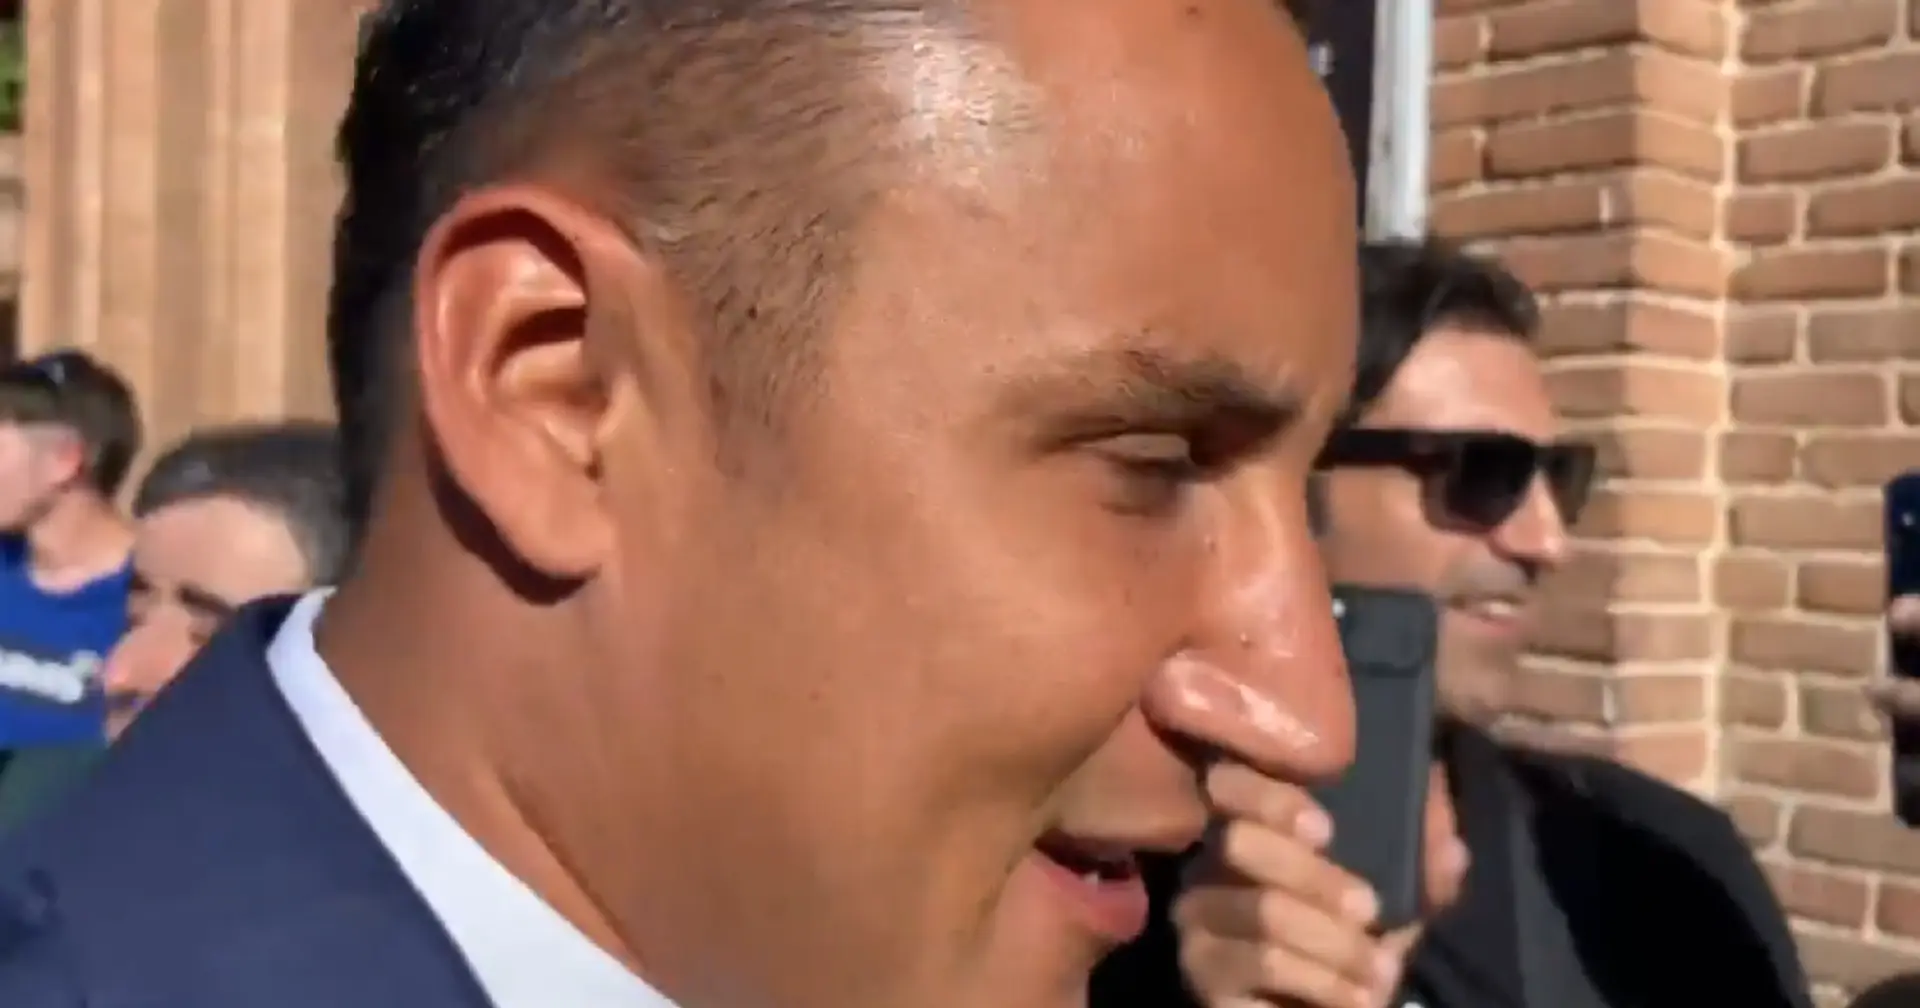 2 Real Madrid legends arrive in Madrid – they get mobbed by press (video)